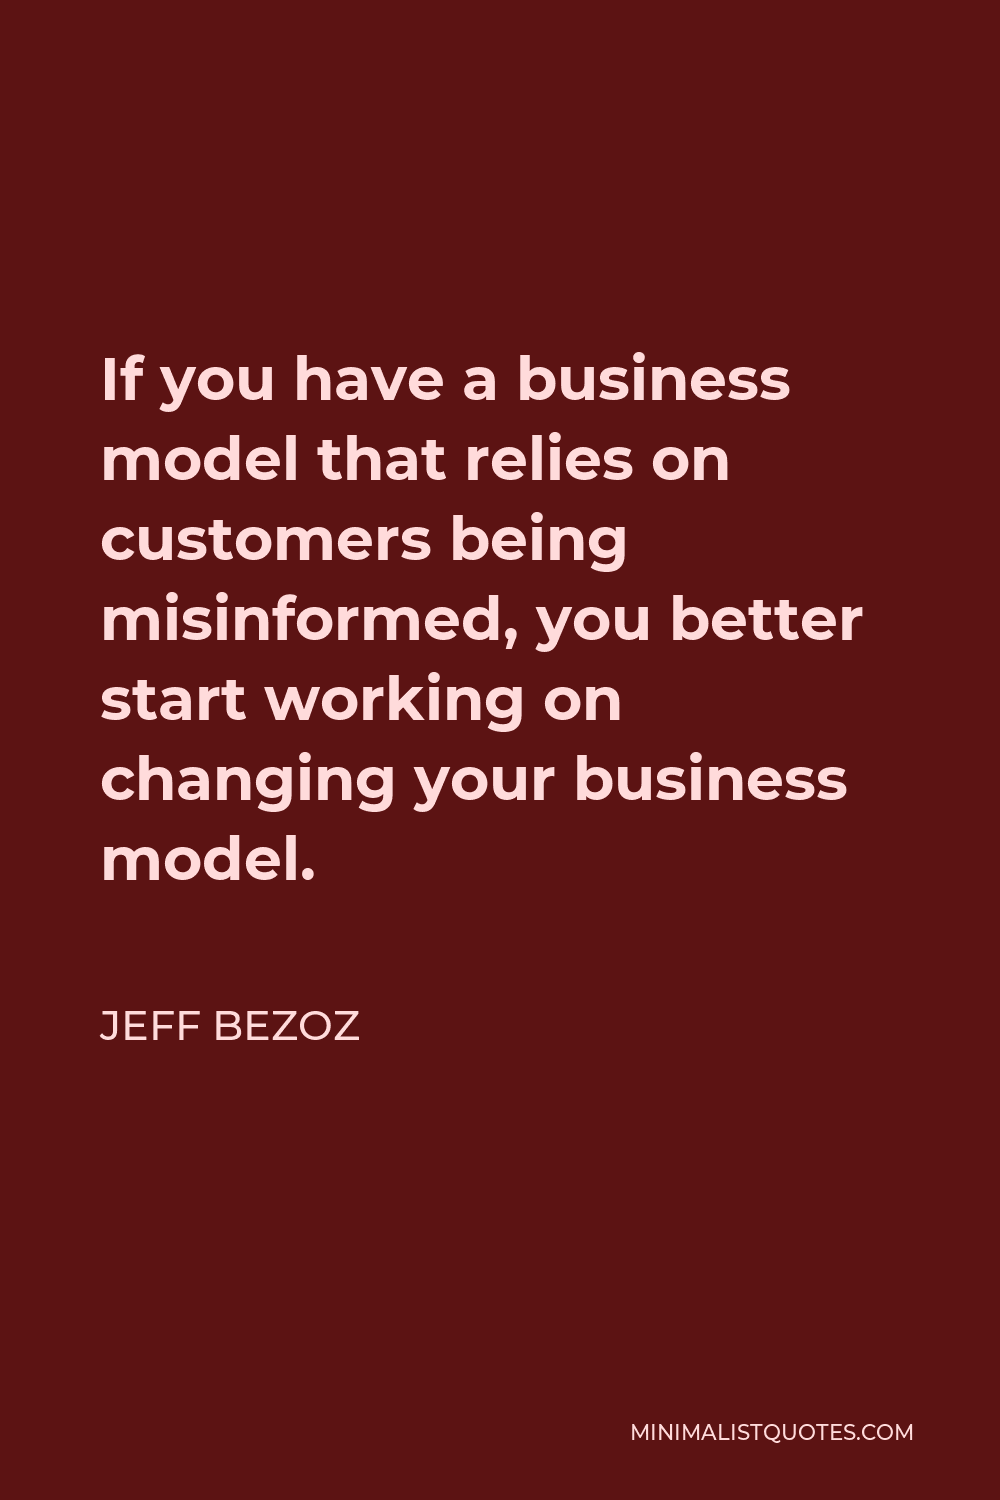 Jeff Bezoz Quote - If you have a business model that relies on customers being misinformed, you better start working on changing your business model.